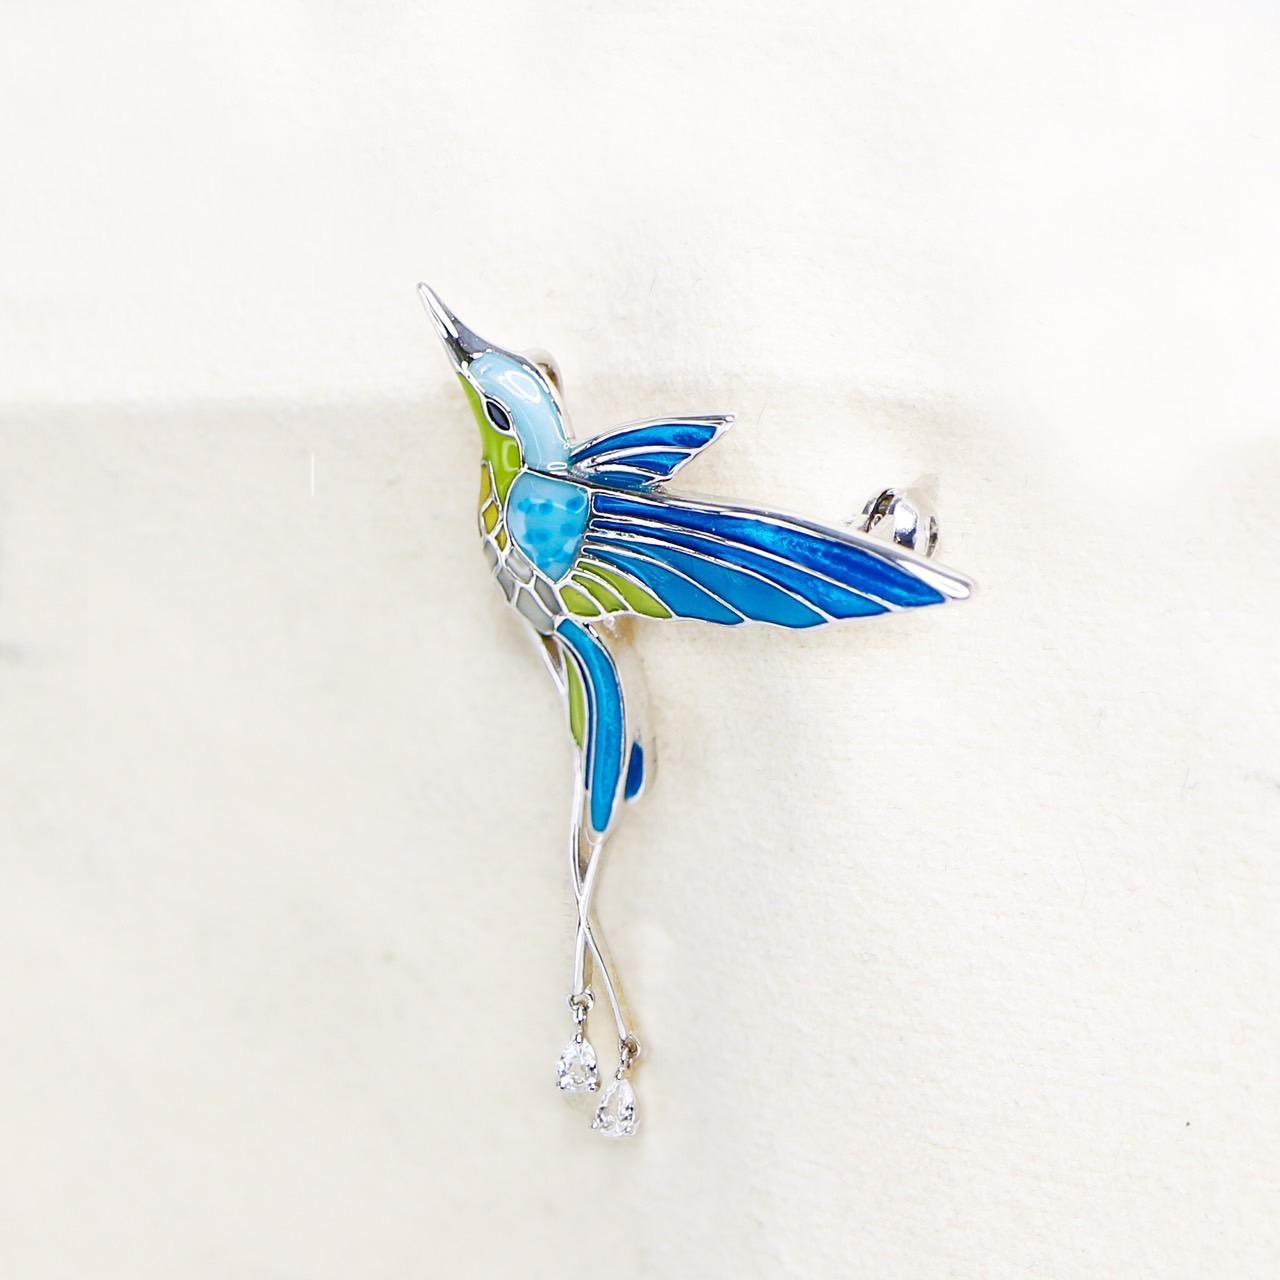 *925 Sterling Silver Swallow Enamel Antique Stud Brooch*

Swallow shape enamel on the white gold plated 925 sterling silver band with fine workmanship and enamel art. 

The earrings combine fashion and classic design ideas and are suitable for